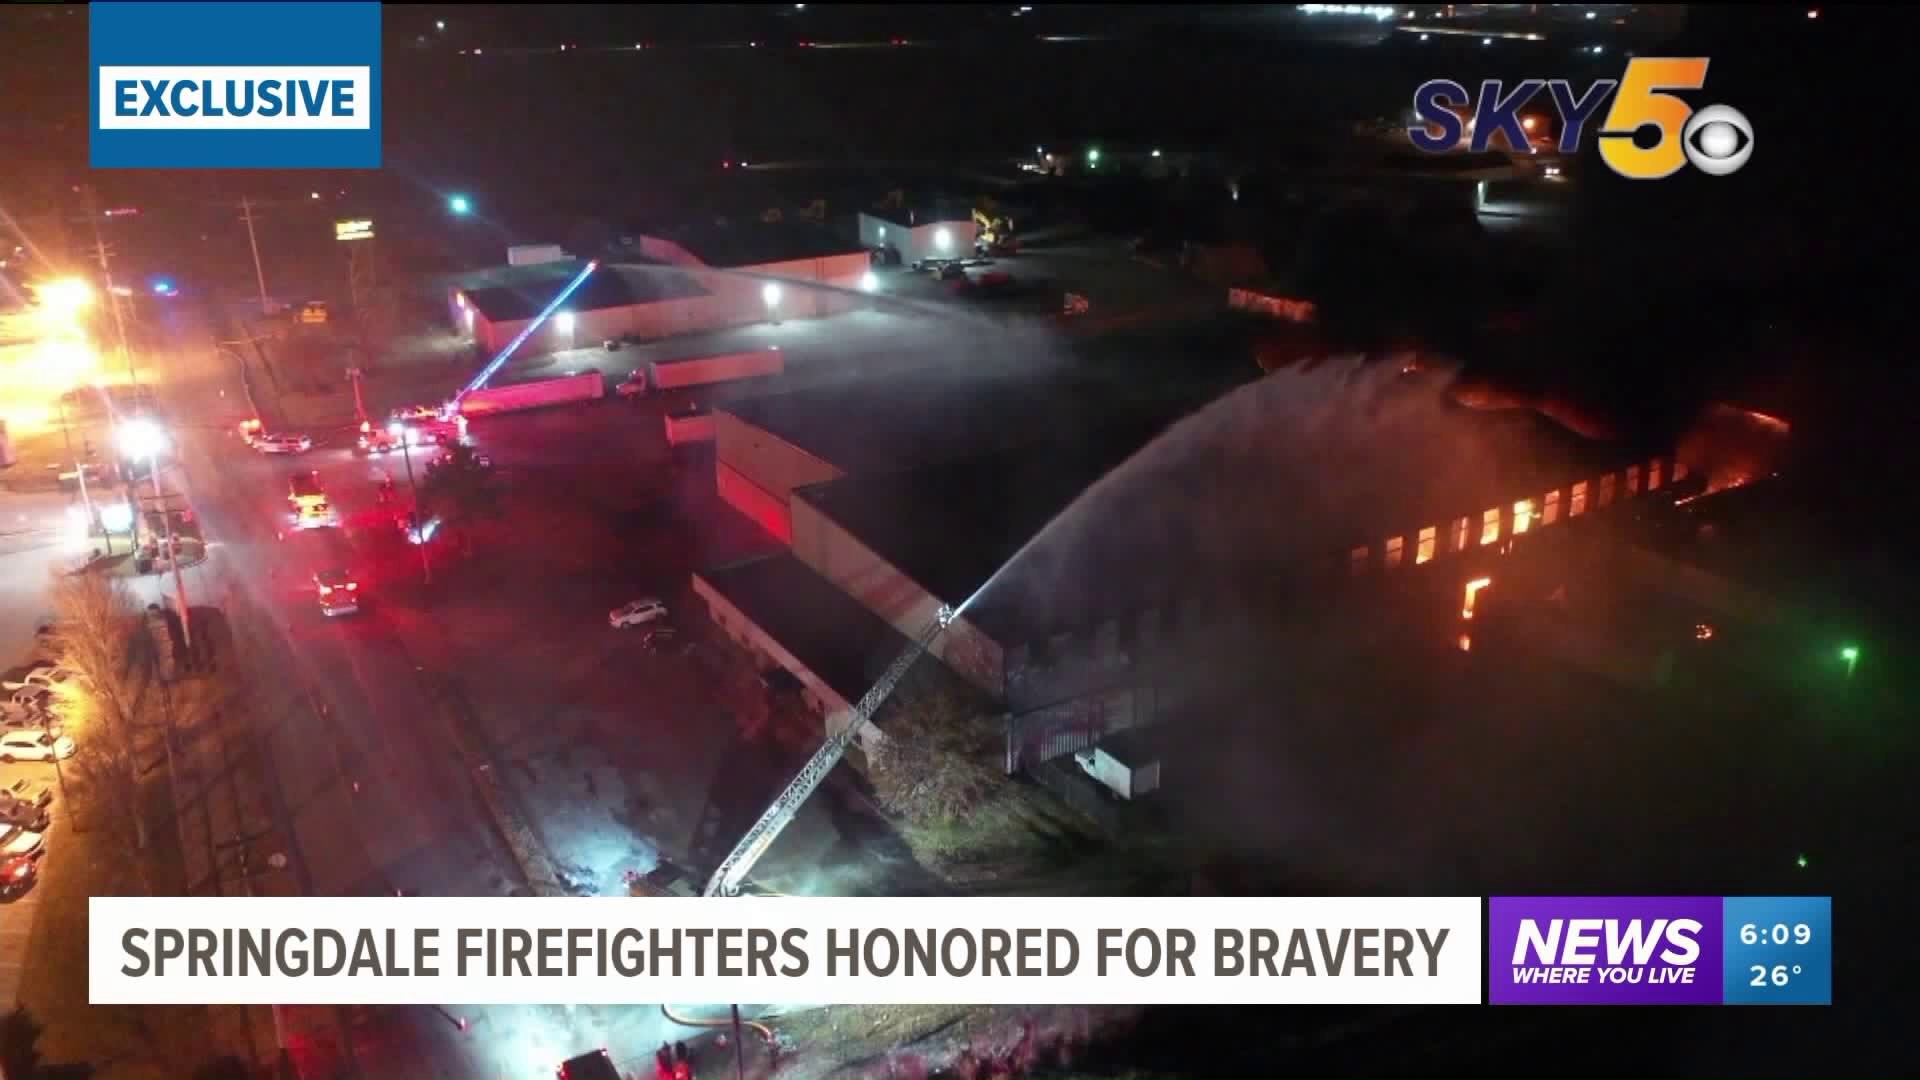 Springdale Firefighters Honored for Bravery